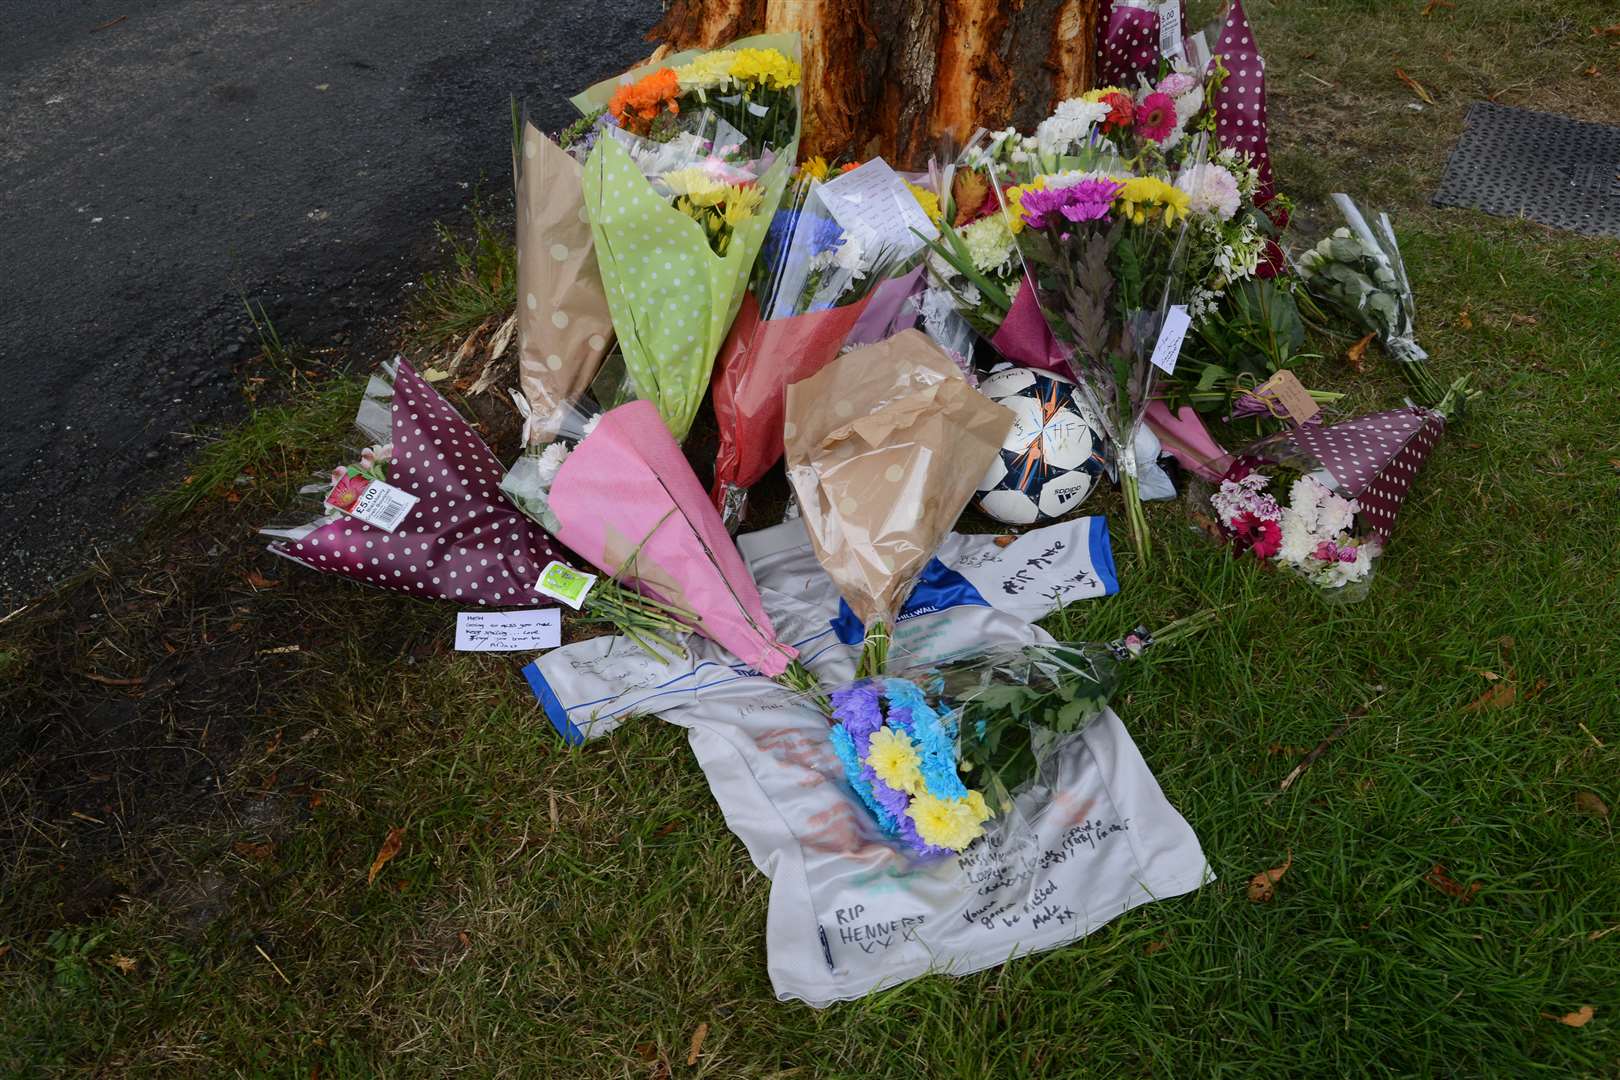 Flowers at the scene of the accident on Tuesday night. Picture: Gary Browne